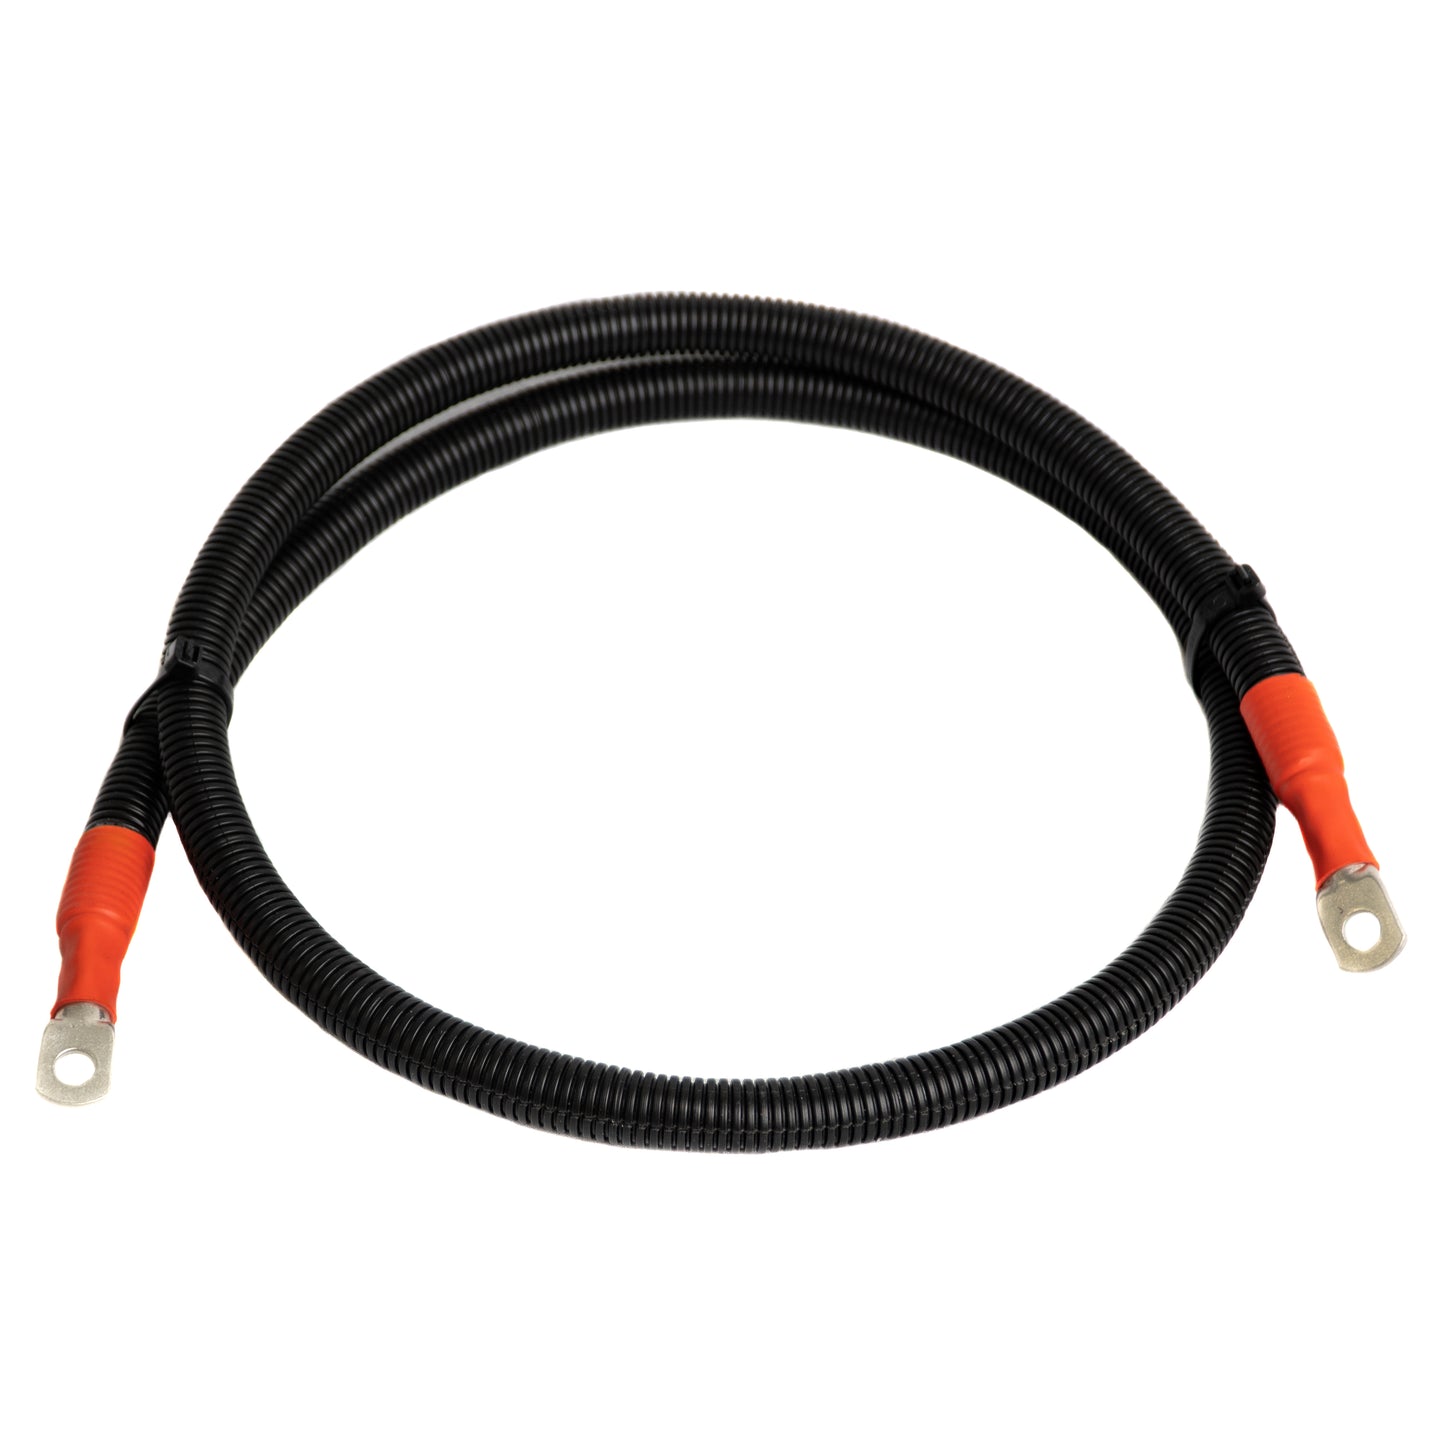 Lithium Dual Battery Cable Kit to suit 200 Series